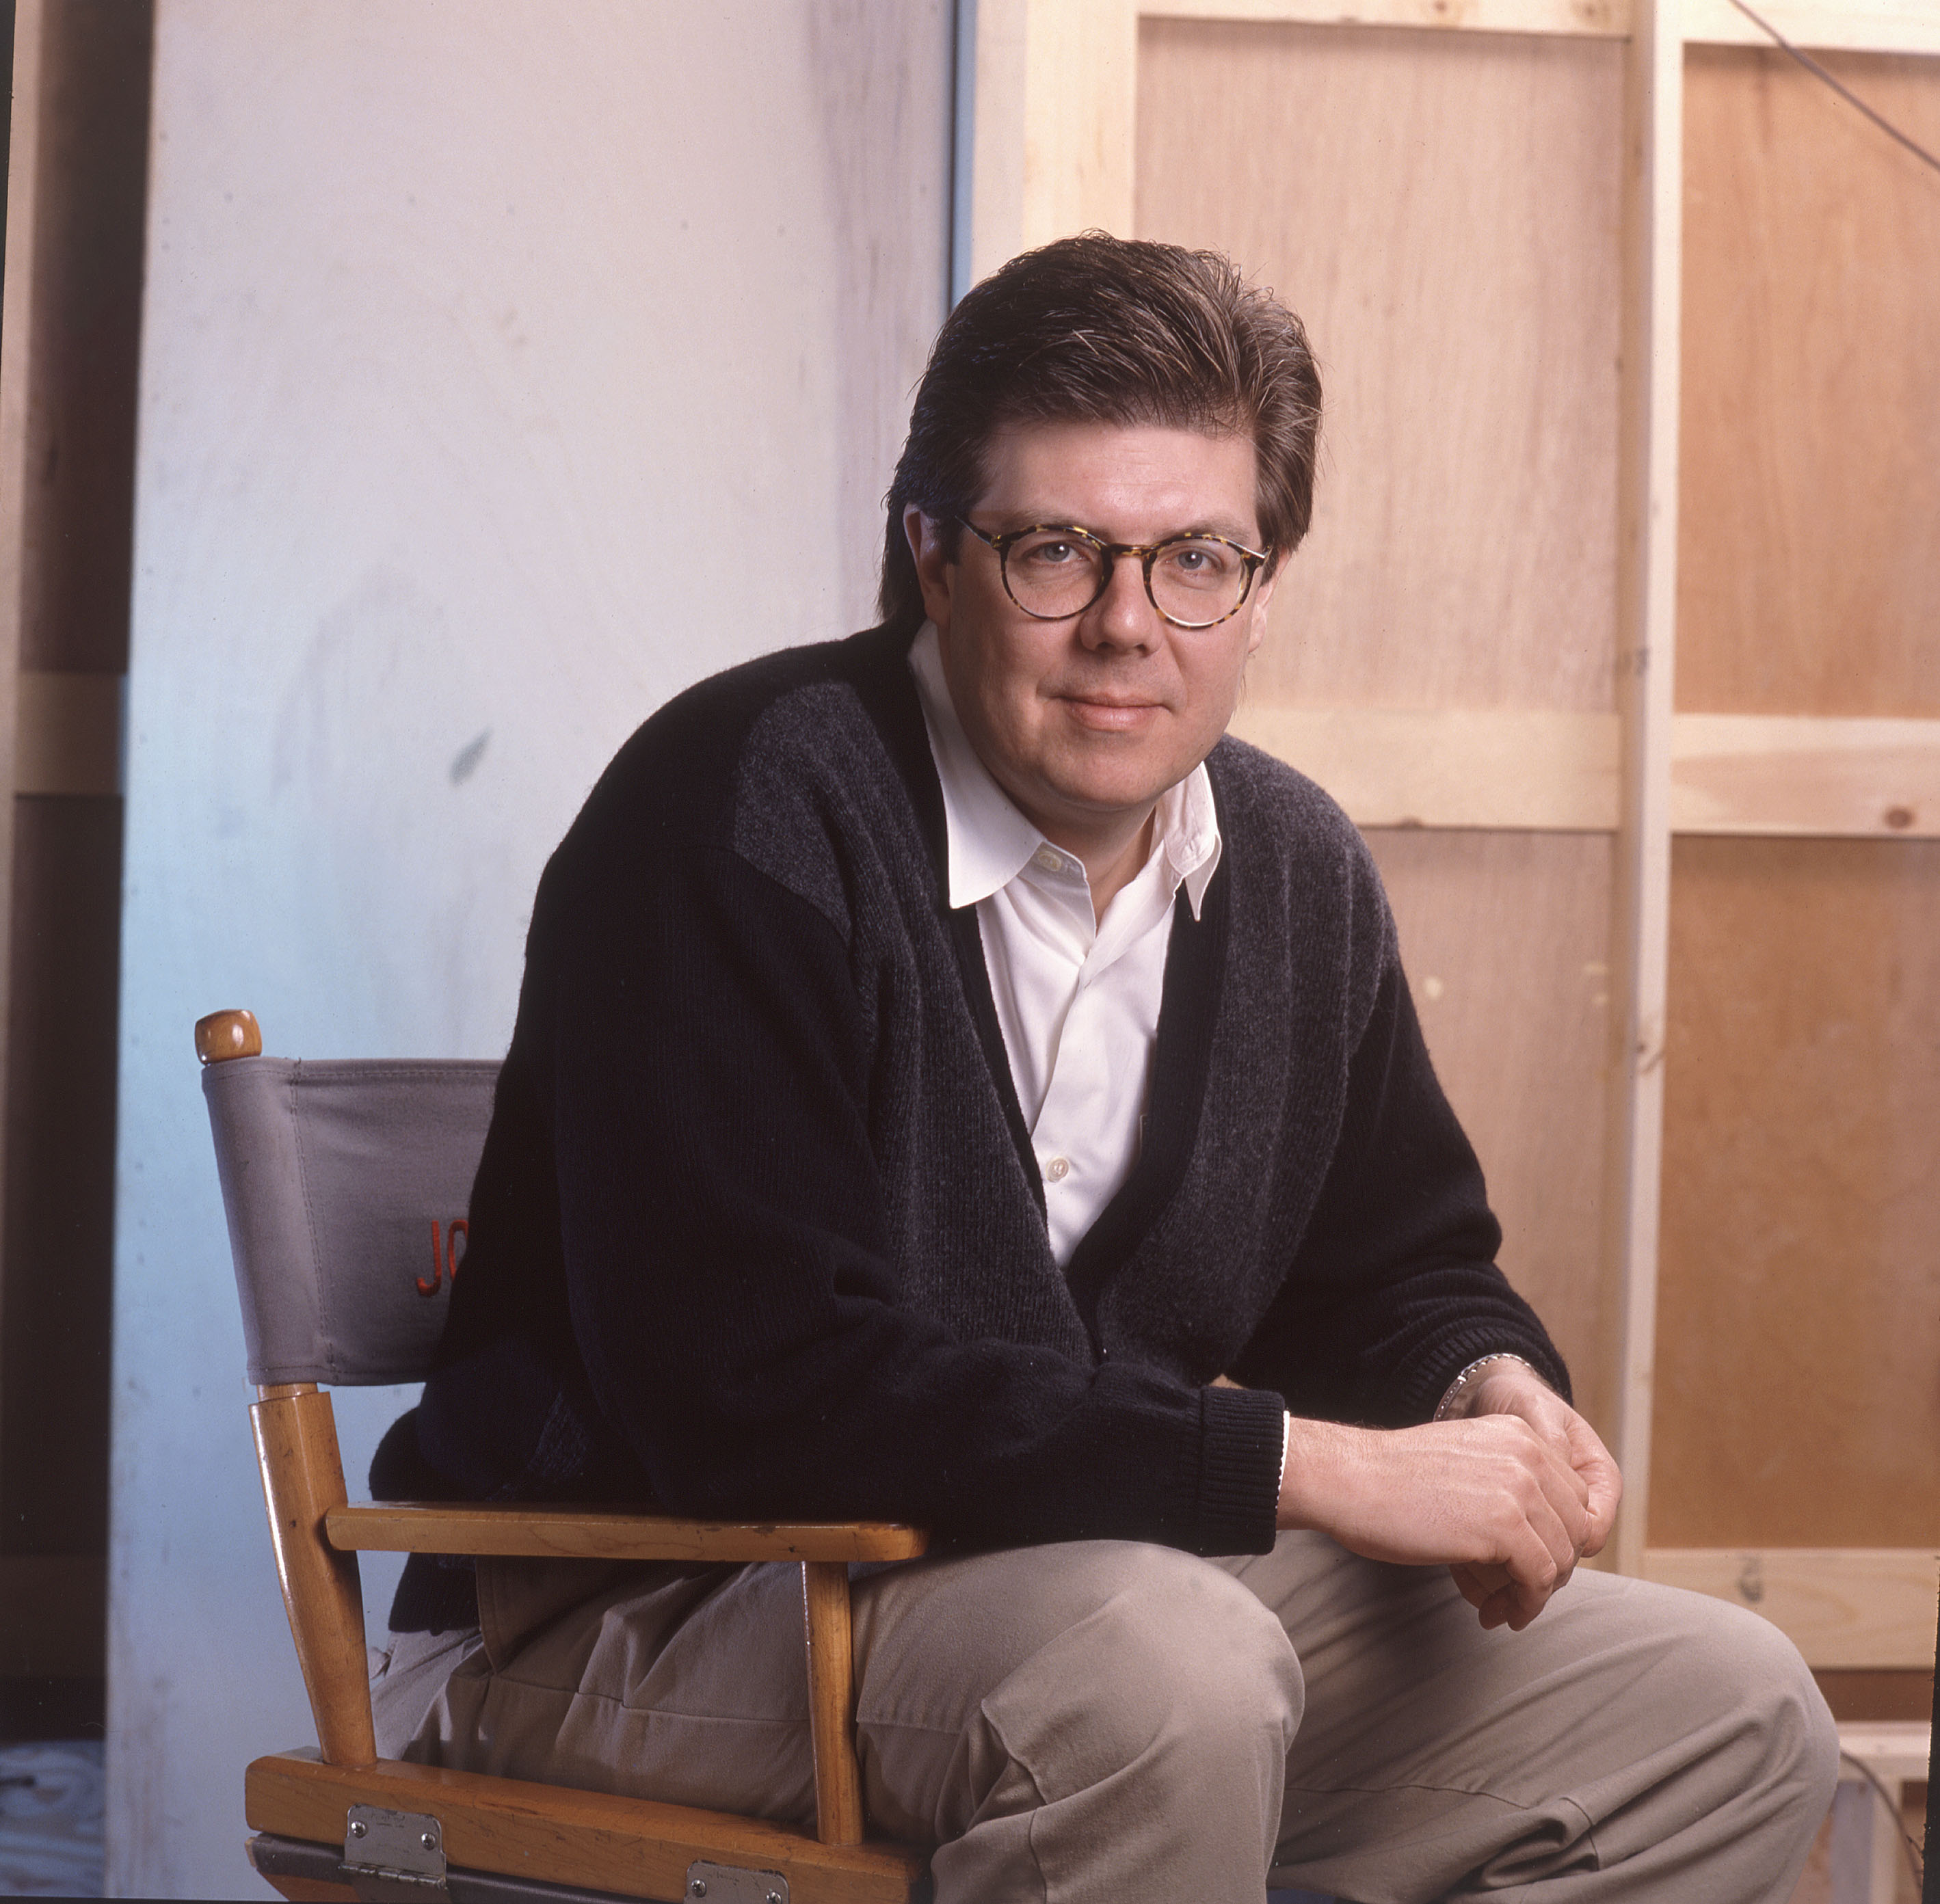 John Hughes posing for a portrait in Chicago, Illinois on November 28, 1990 | Source: Getty Images